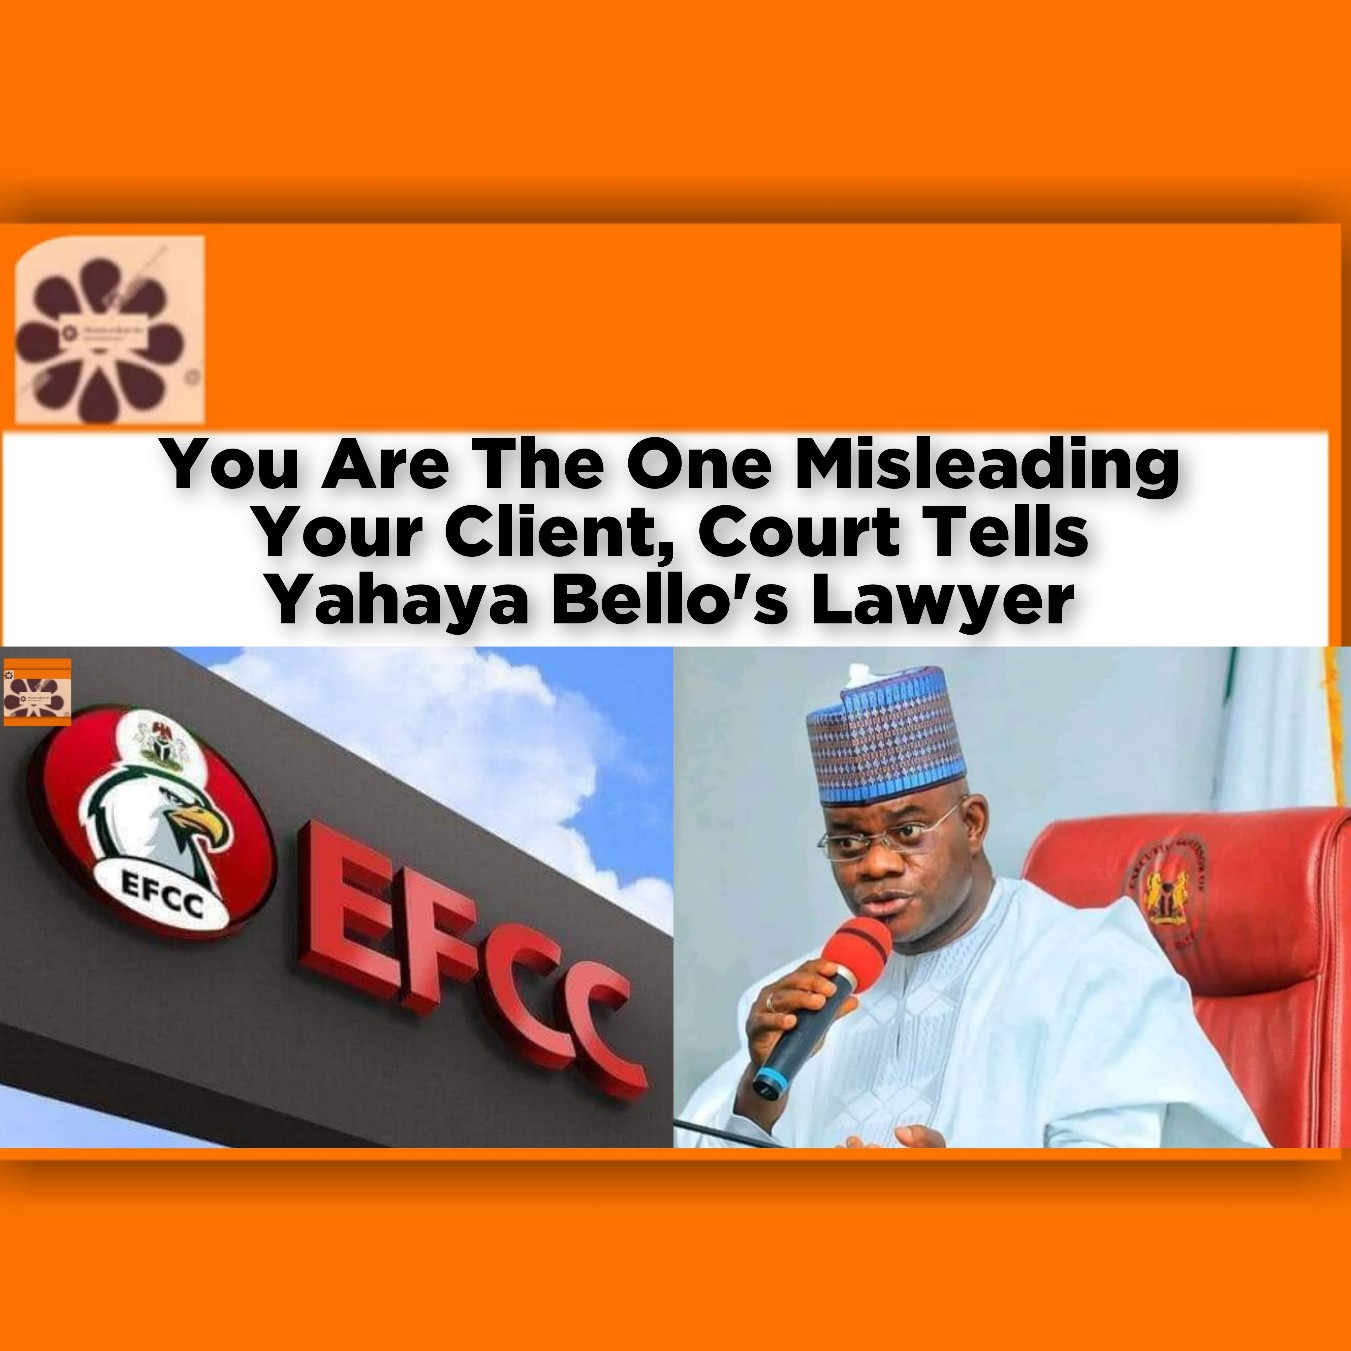 You Are The One Misleading Your Client, Court Tells Yahaya Bello's Lawyer ~ OsazuwaAkonedo #Redesign